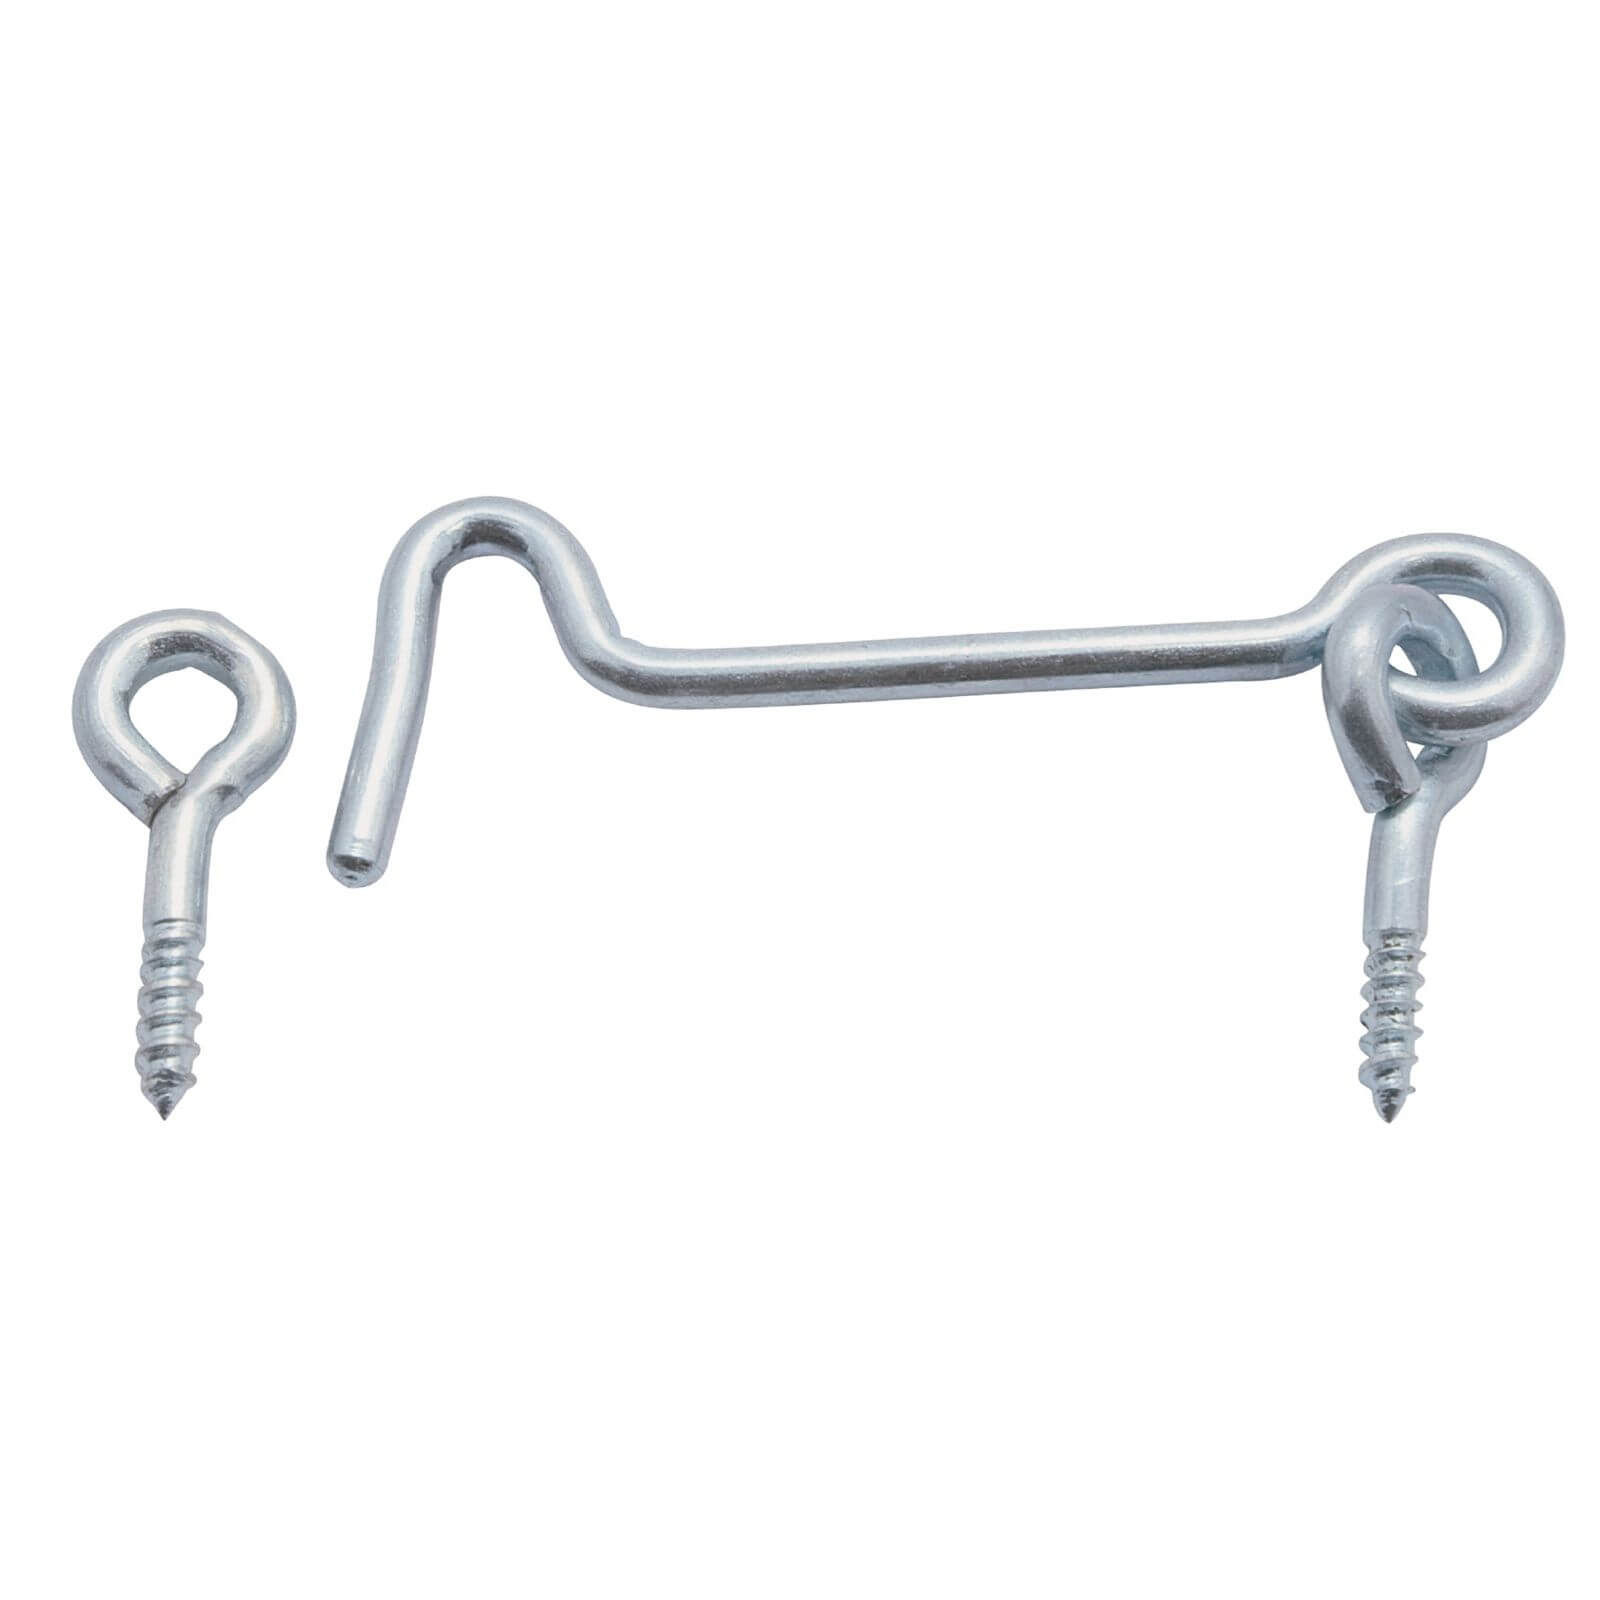 Photo of Gate Hook And Eye - Zinc Plate - 2 Pack